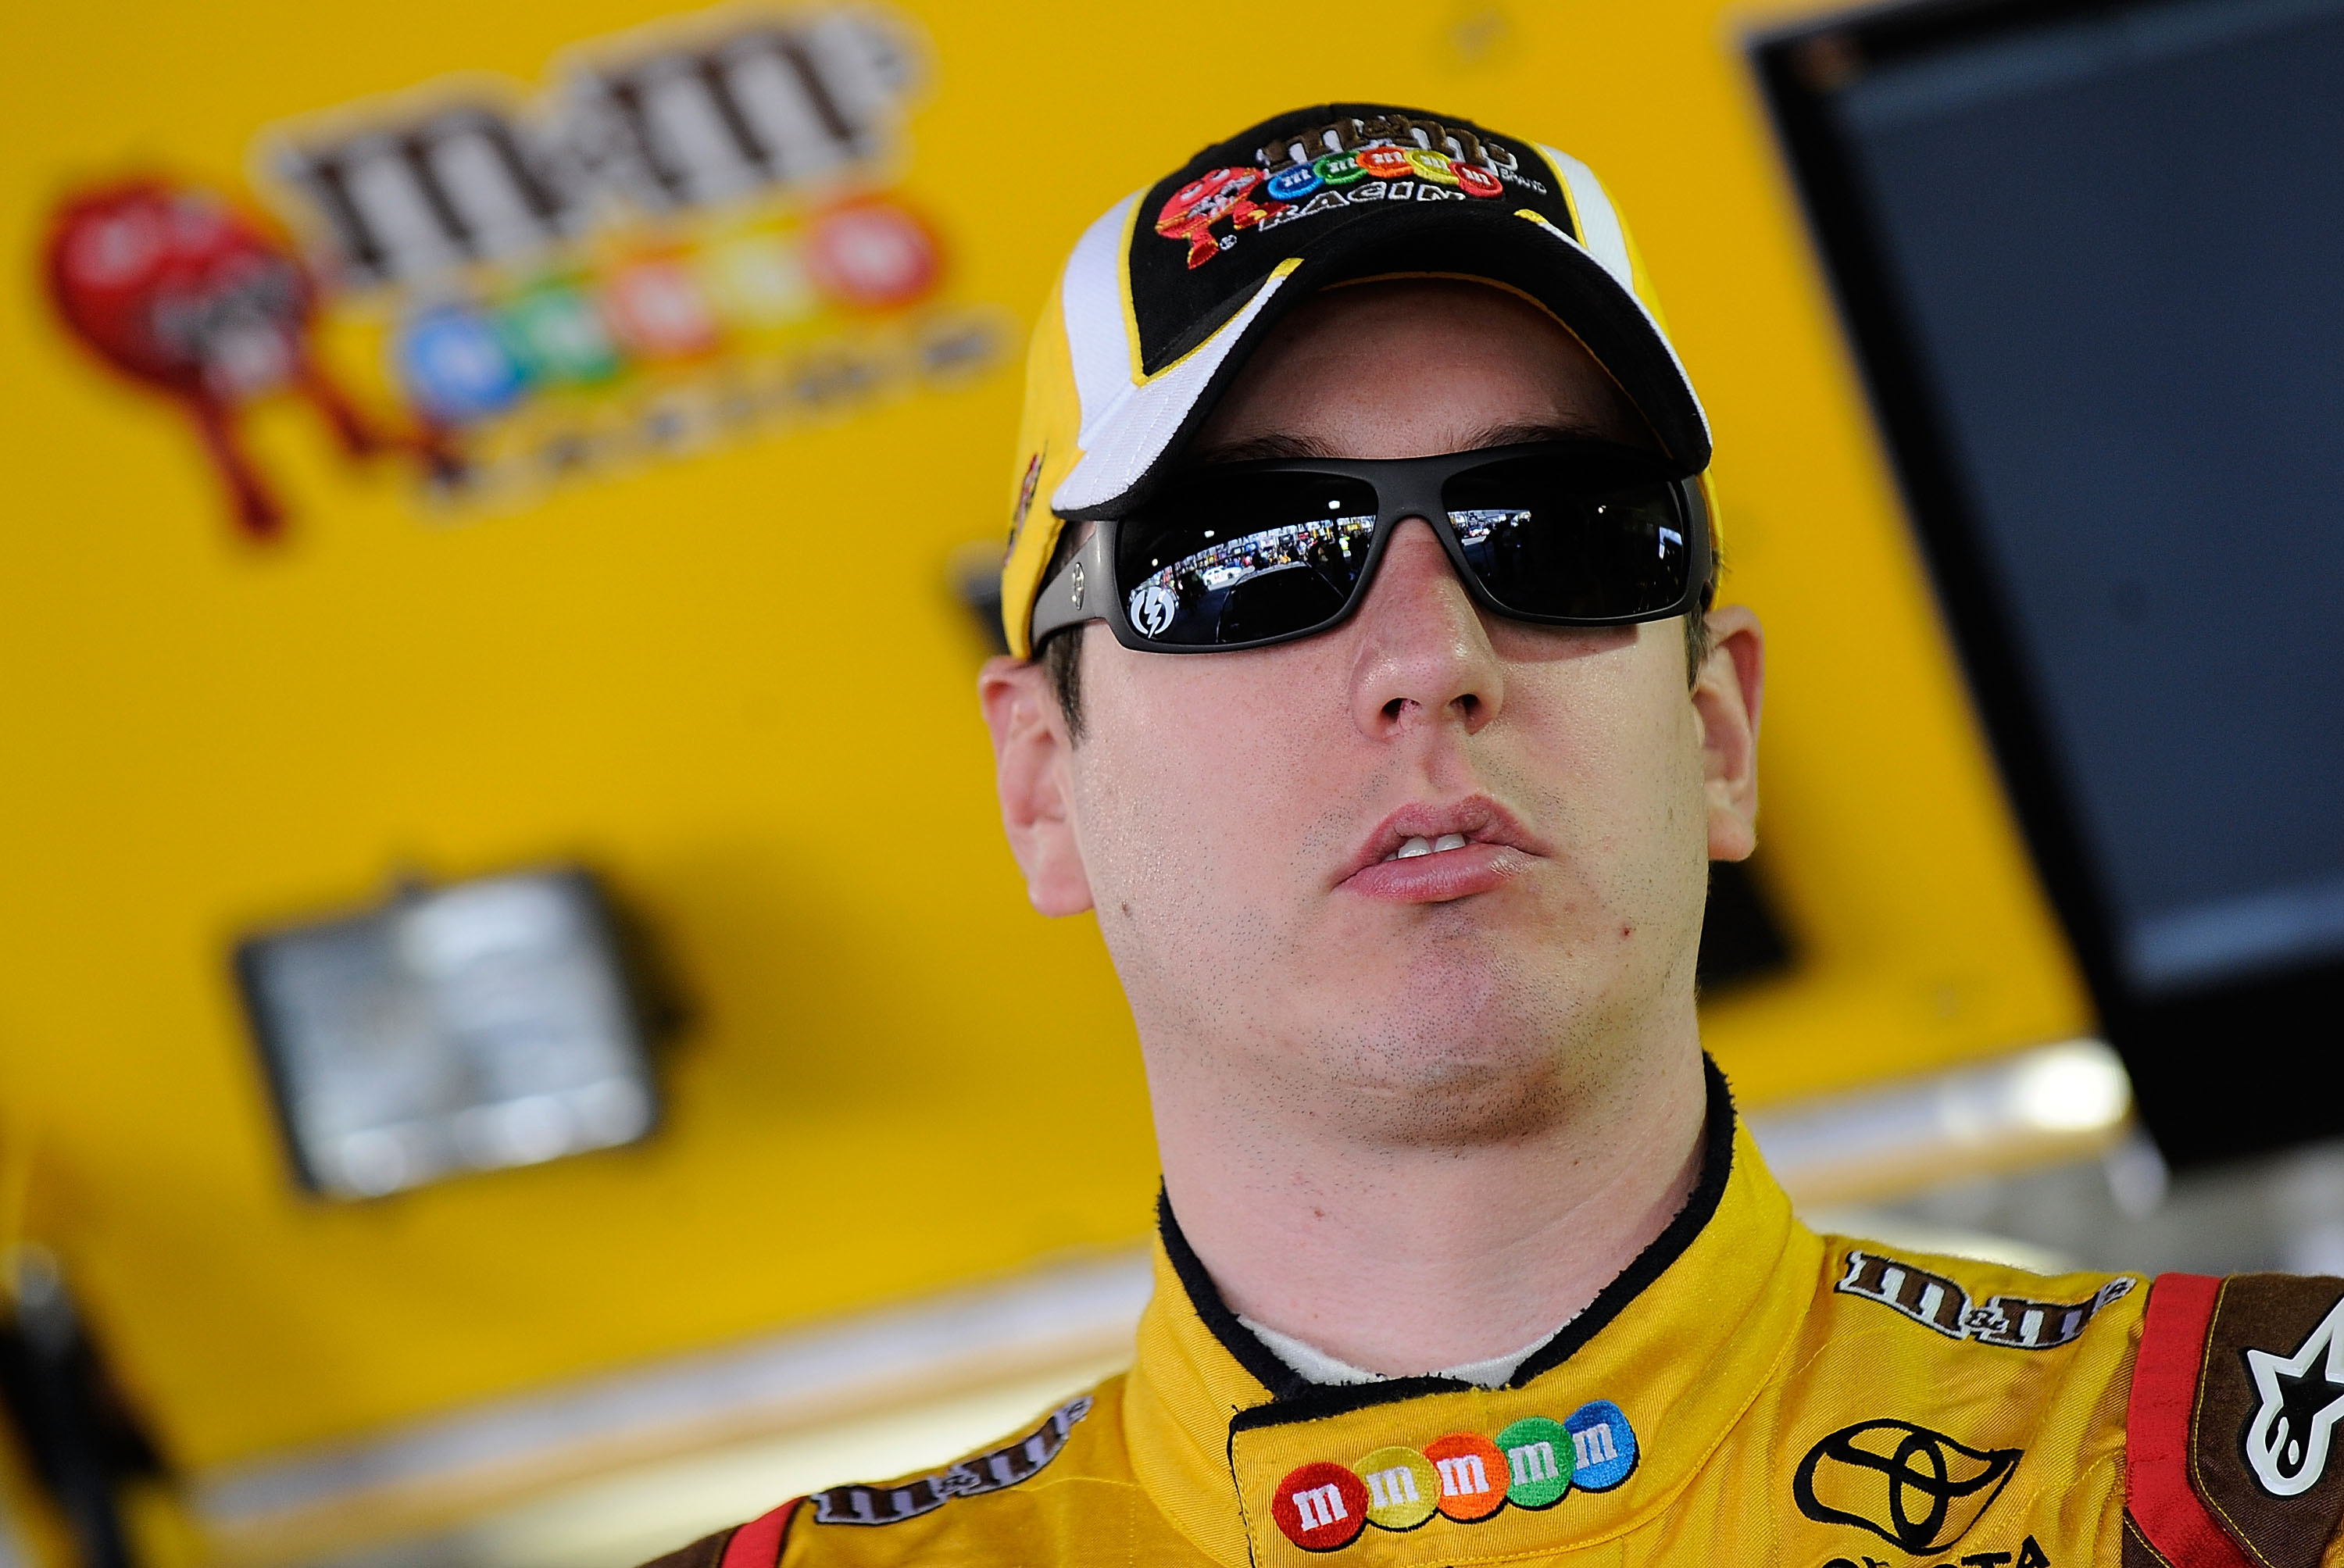 MARTINSVILLE, VA - OCTOBER 22:  Kyle Busch, driver of the #18 M&M's Toyota, stands in the garage prior to practice for the NASCAR Sprint Cup Series TUMS Fast Relief 500 at Martinsville Speedway on October 22, 2010 in Martinsville, Virginia.  (Photo by Rus